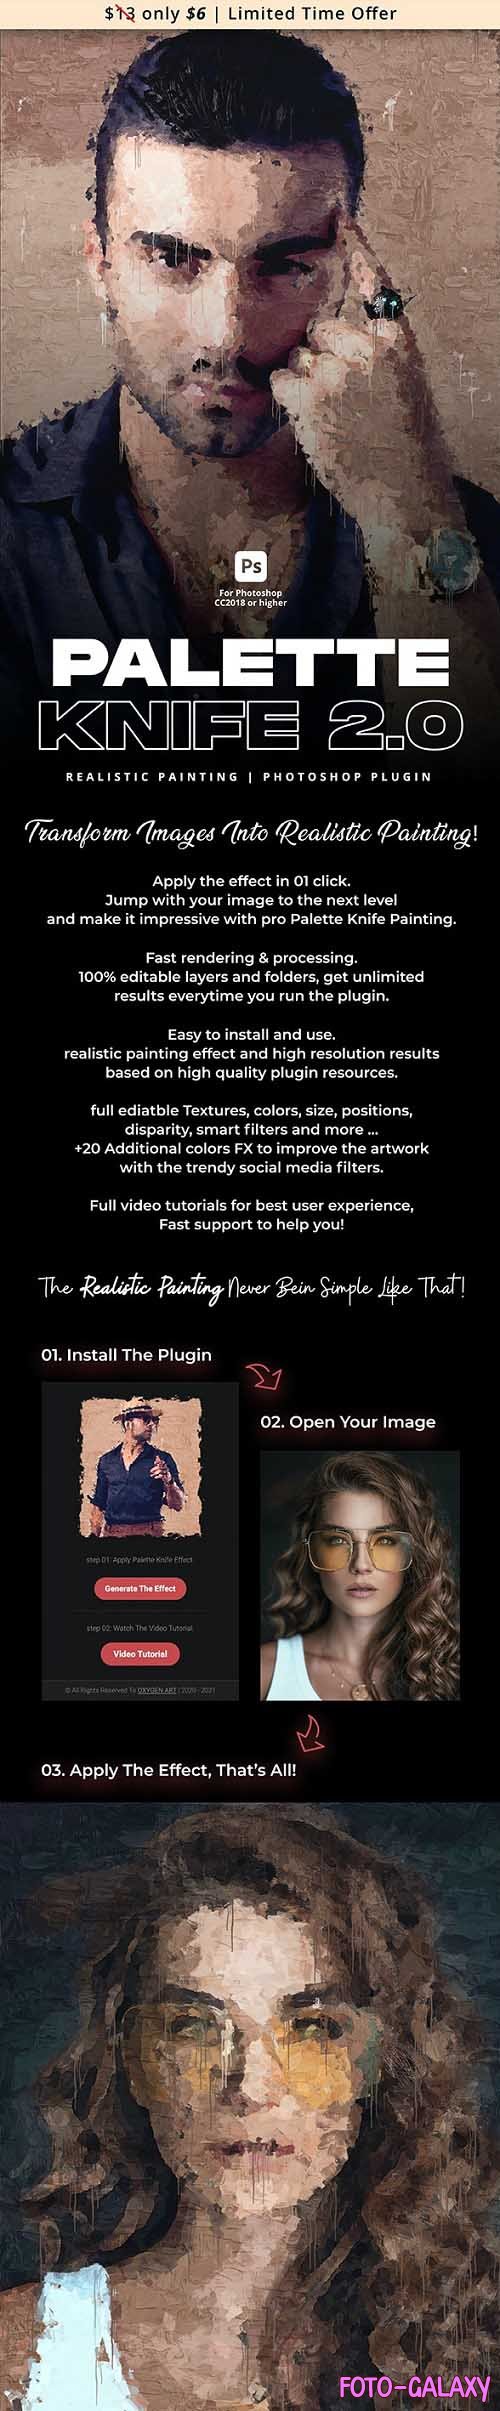 Palette Knife 2.0 | Realistic Painting Photoshop Plugin - 34915390